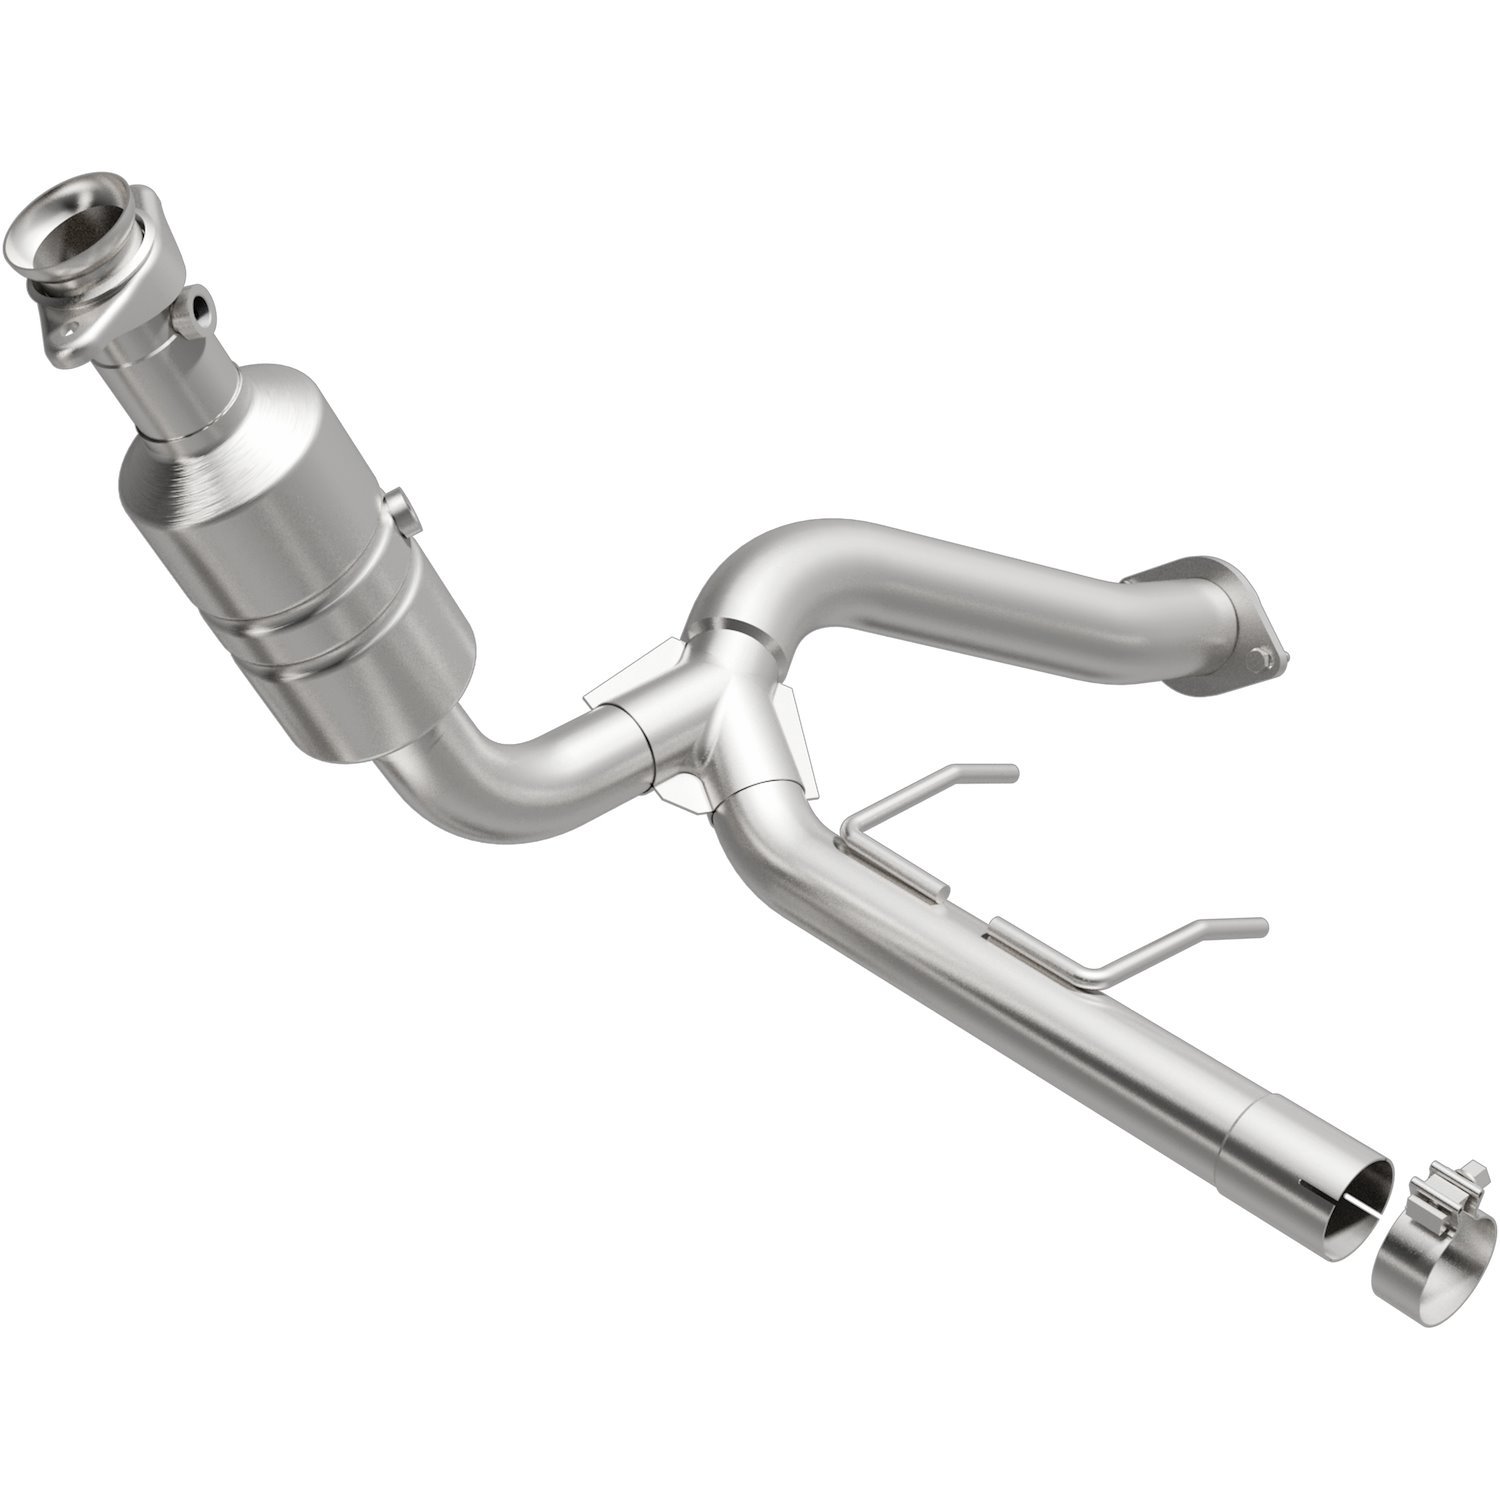 2009-2010 Ford F-150 OEM Grade Federal / EPA Compliant Direct-Fit Catalytic Converter